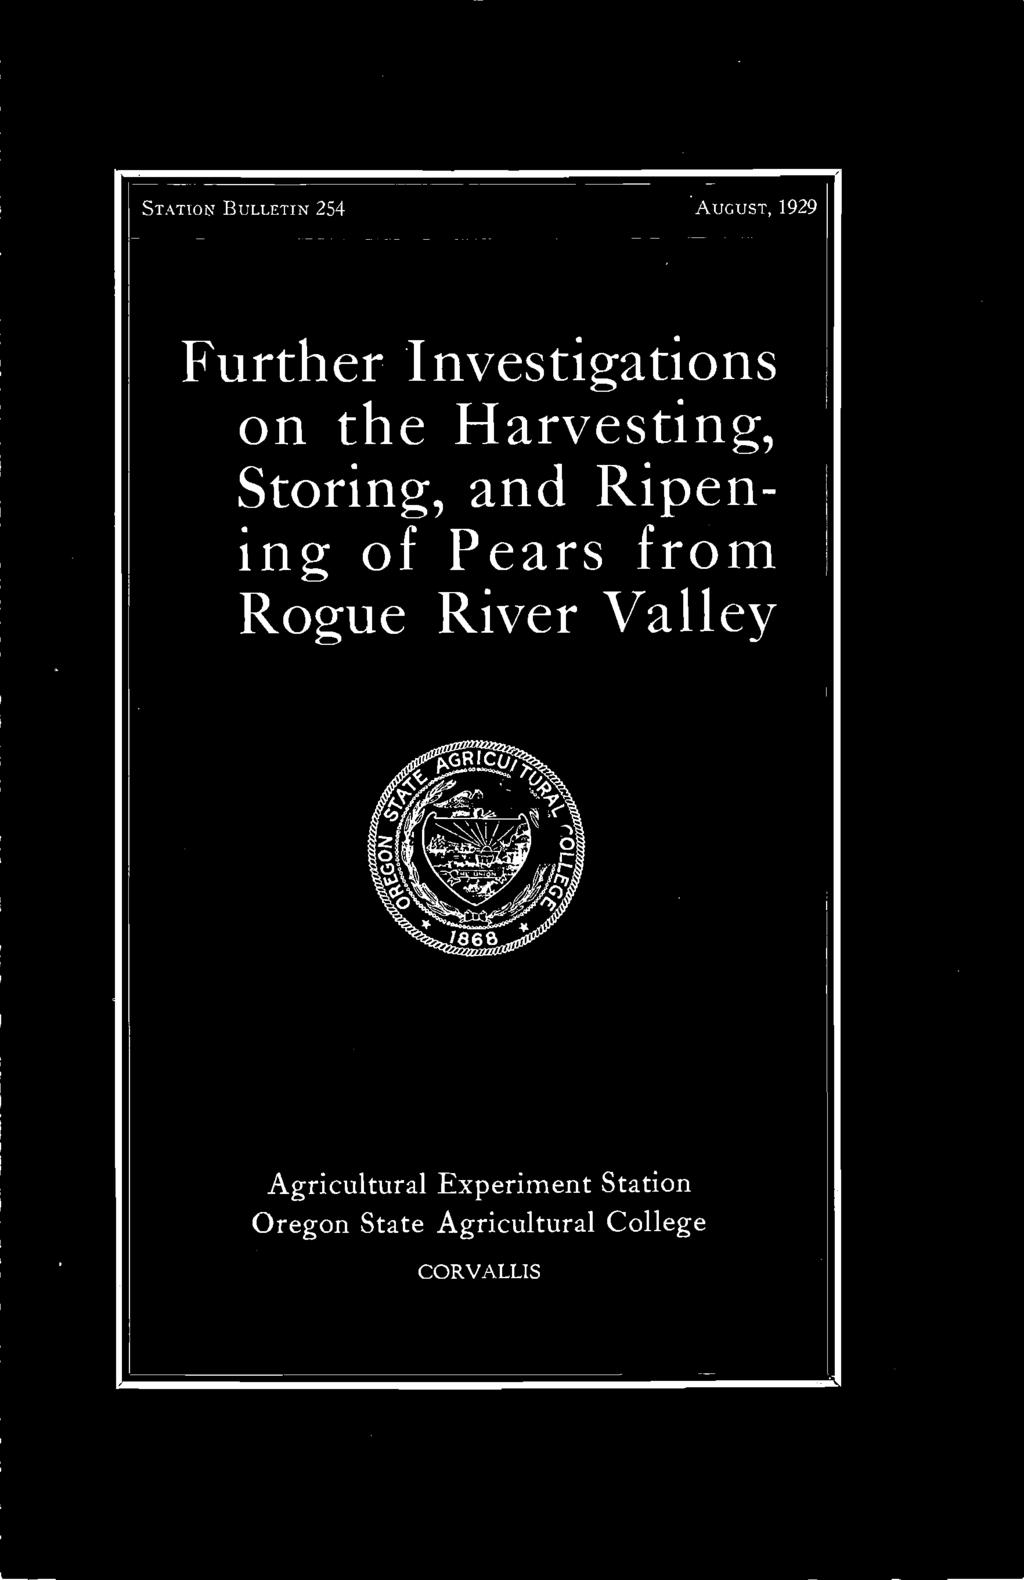 Ripening of Pers from Rogue River Vlley